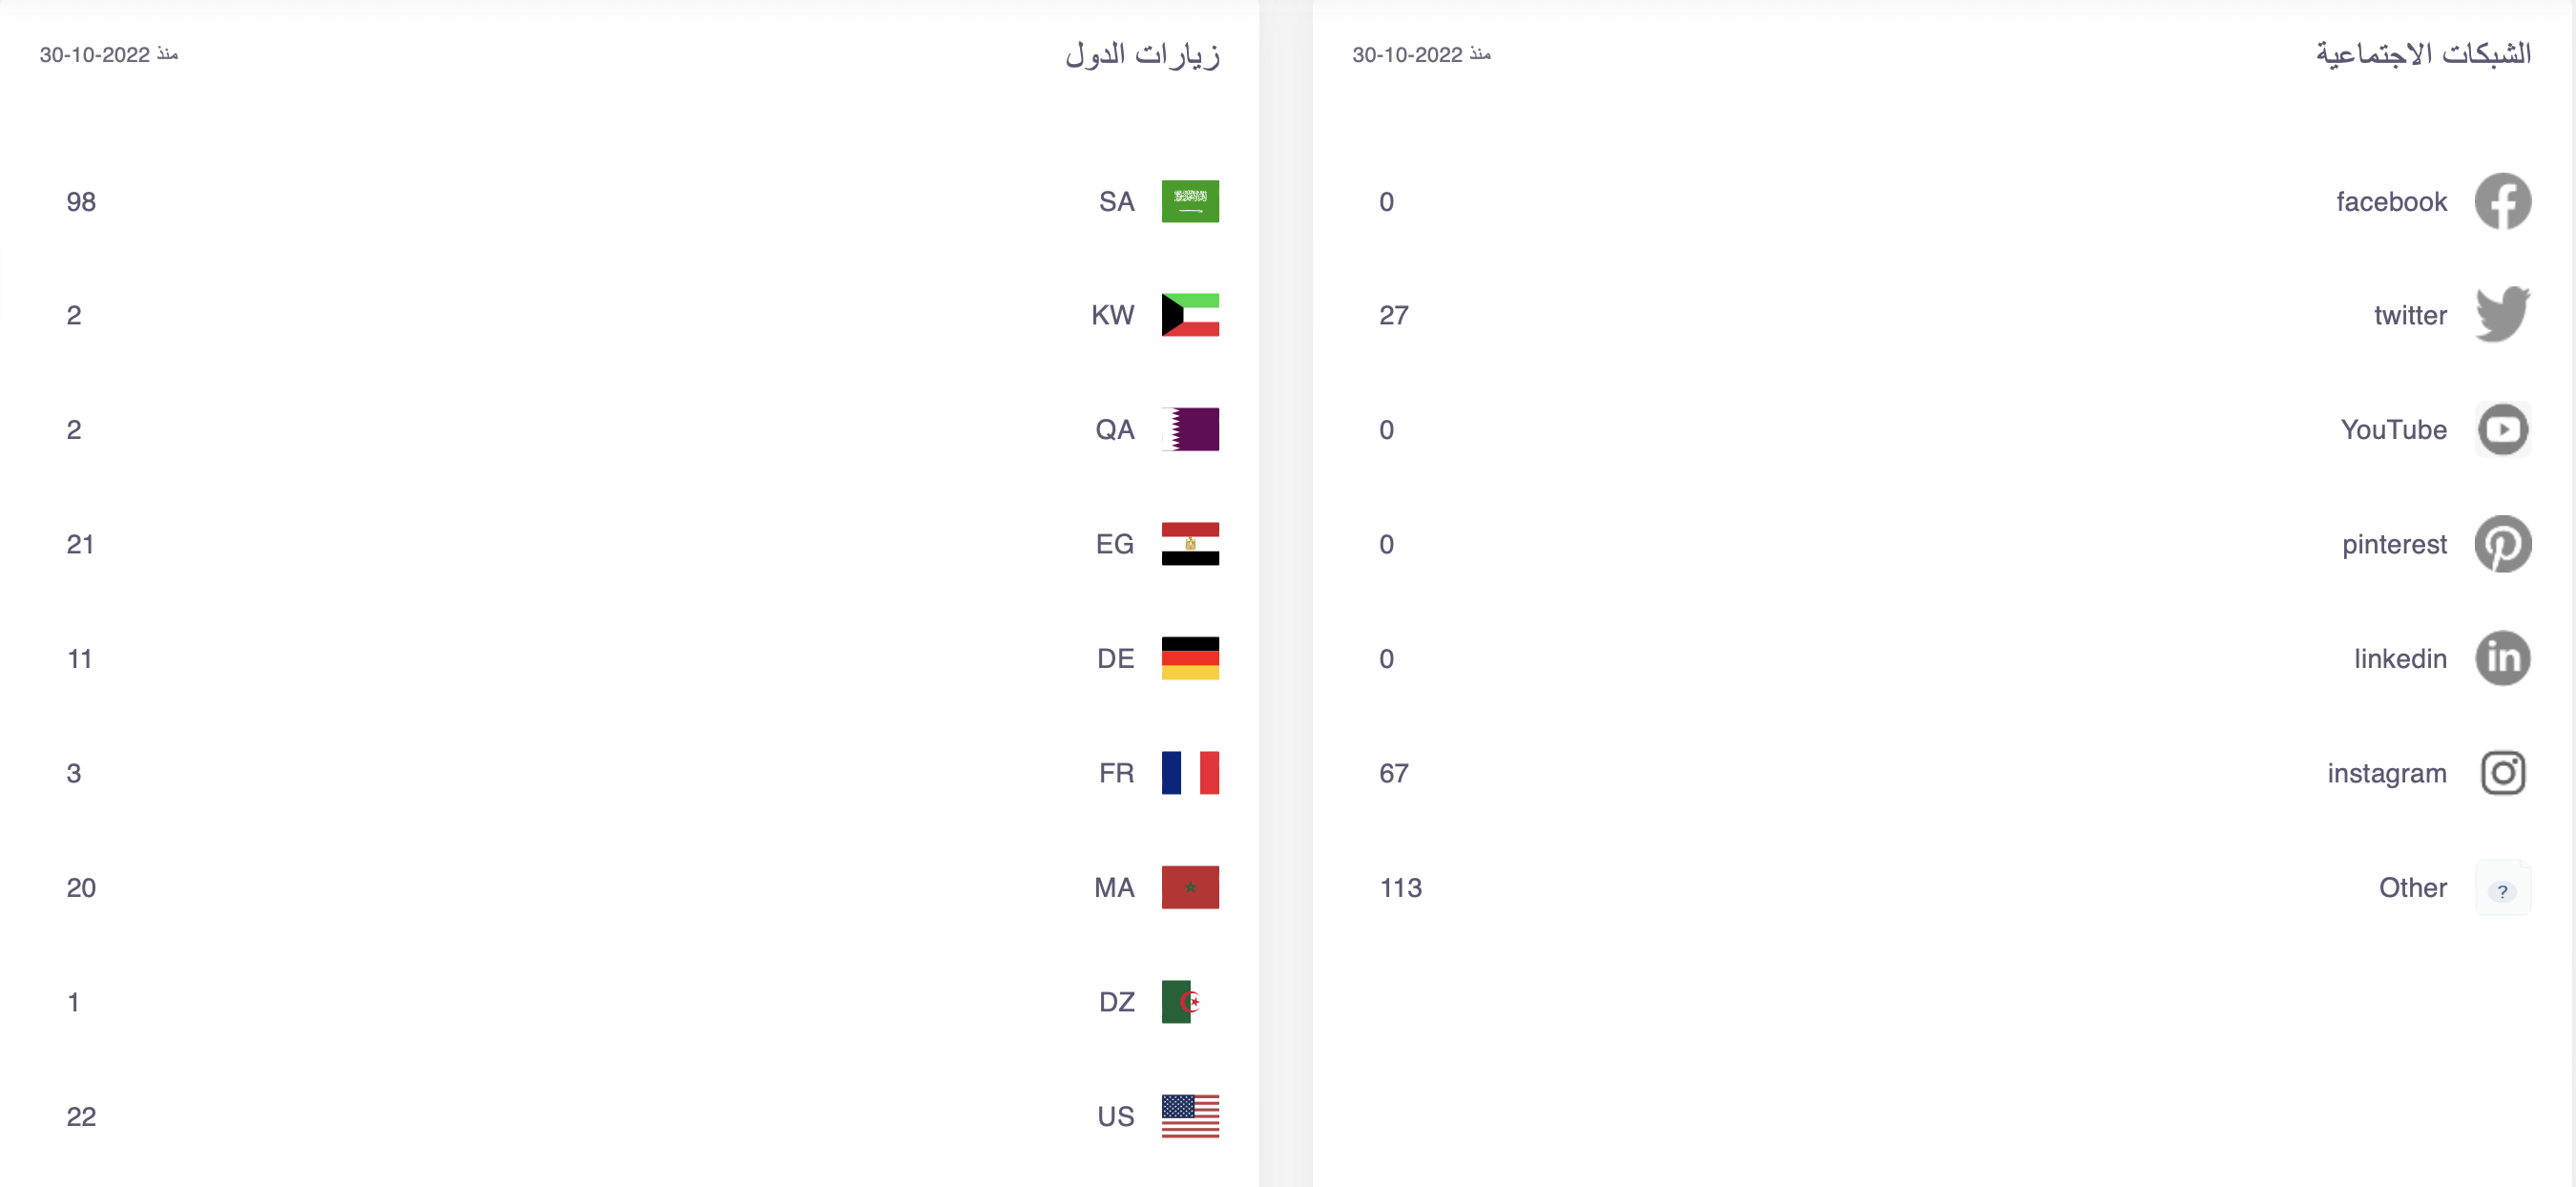 run influencer marketing campaign with full detailed report about traffic sources in MENA